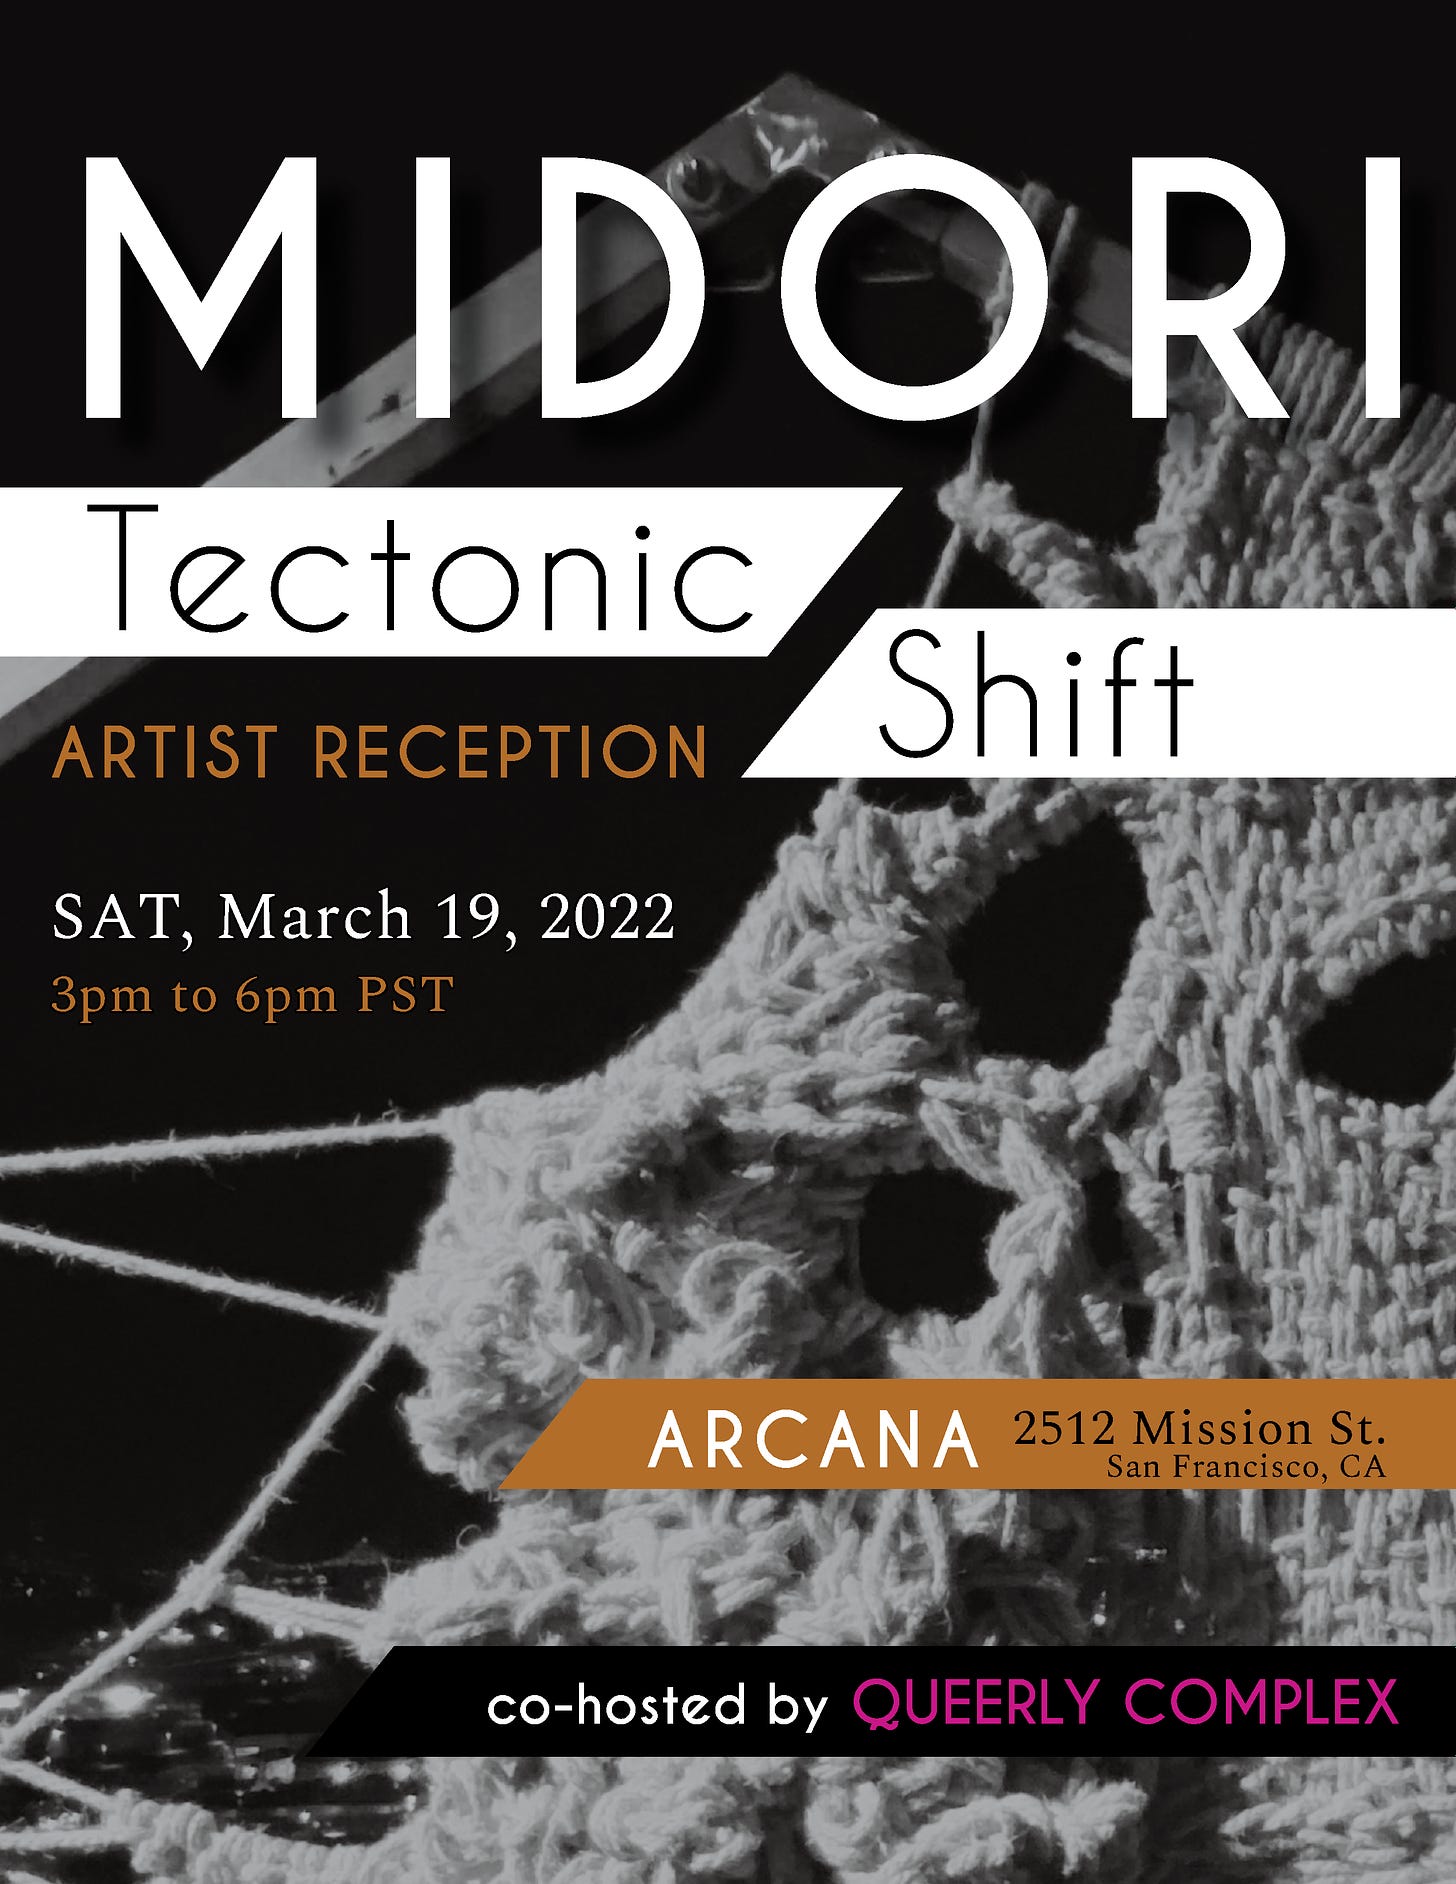 "A flyer for the Midori's Artist Reception called Tectonic Shift. The image is a close up of her Tectonic, which includes a wooden frame in the shape of a hexagon joined together with metal brackets. The frame forms a plate. The landmass on that plate is woven using reclaimed rope. The close up is set against the San Francisco skyline late at night / early in the morning when Midori was weaving the Tectonic."